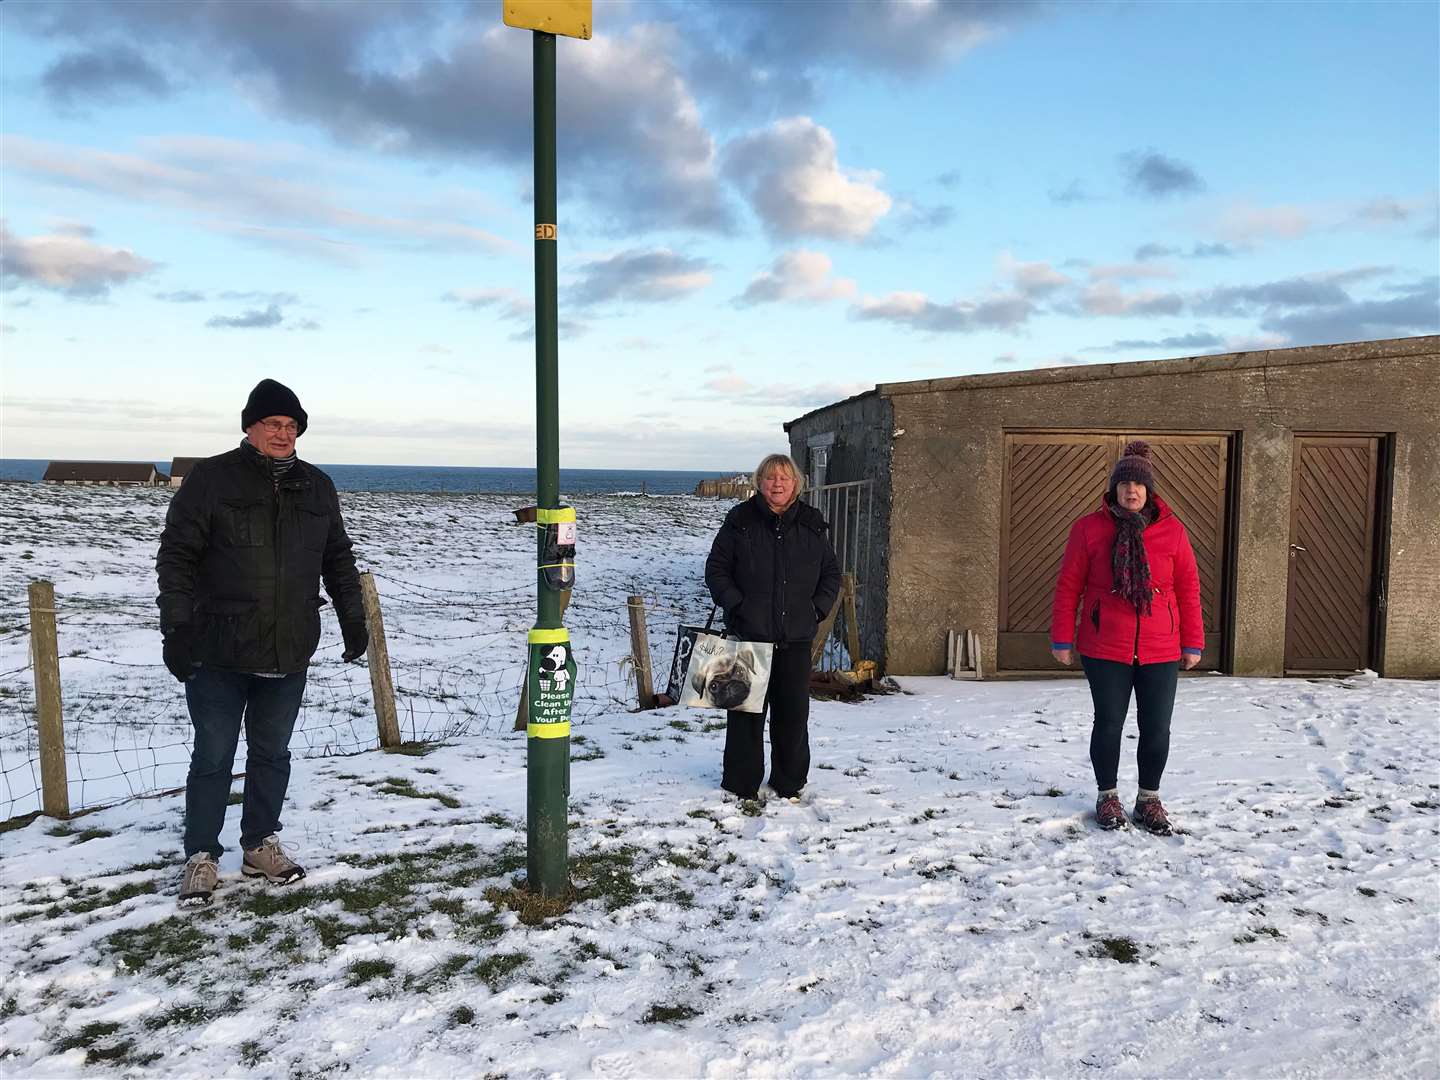 Pat Ramsay (right) with her husband Grant and local resident Pam Jack after they installed one of the poo-bag dispensers. All three are members of Staxigoe, Papigoe and Noss Resilience Group.